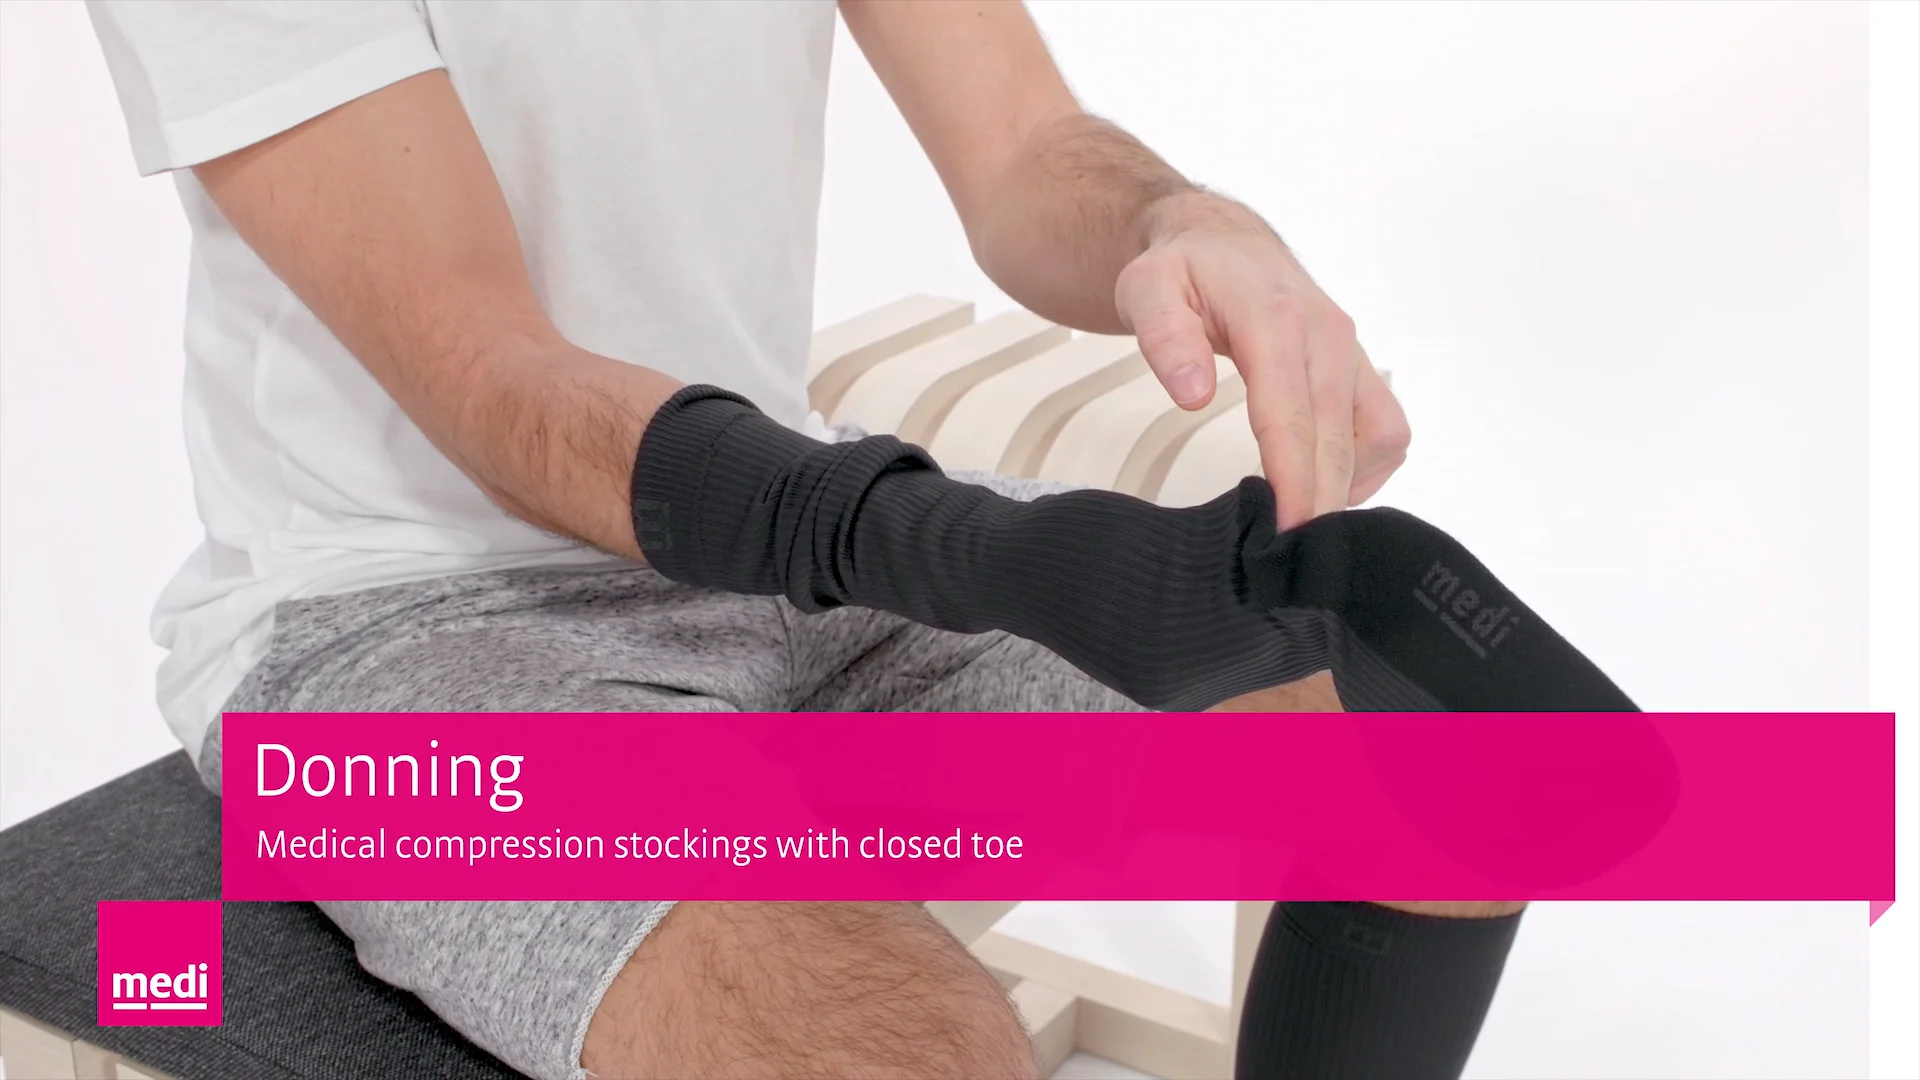 Donning of medical compression stockings, closed toe (mediven